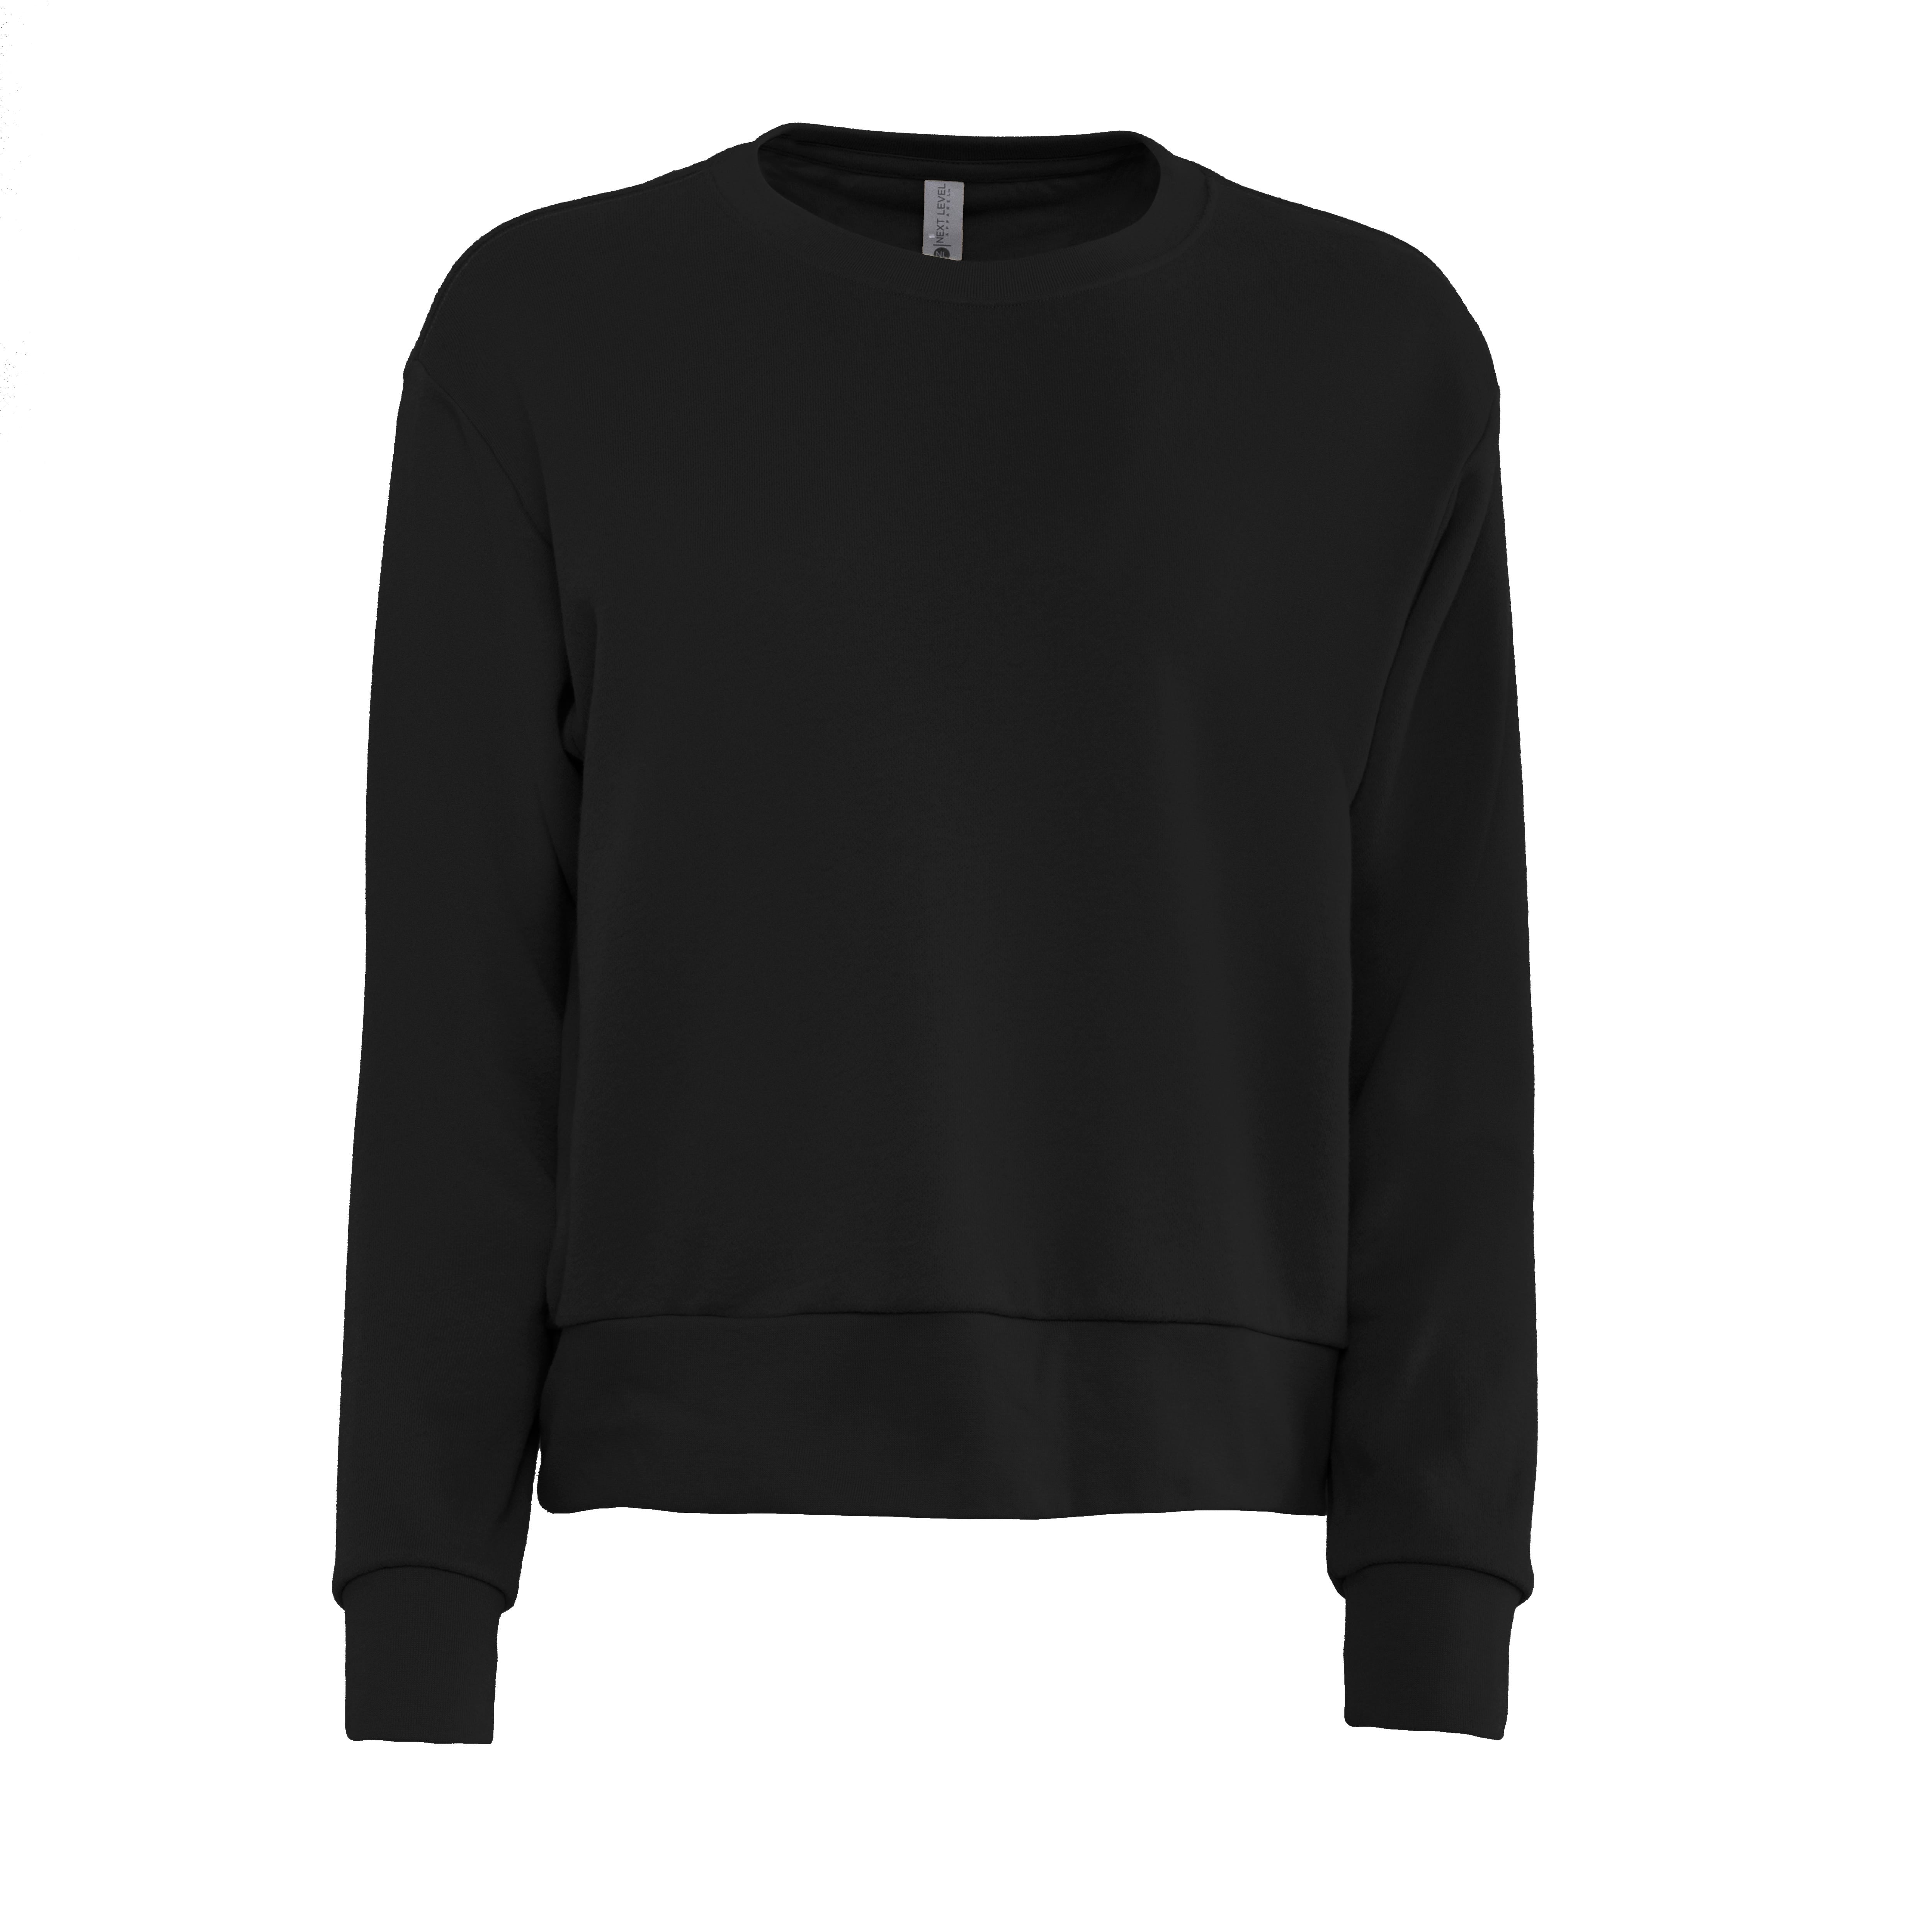 Women's sueded French Terry sweatshirt